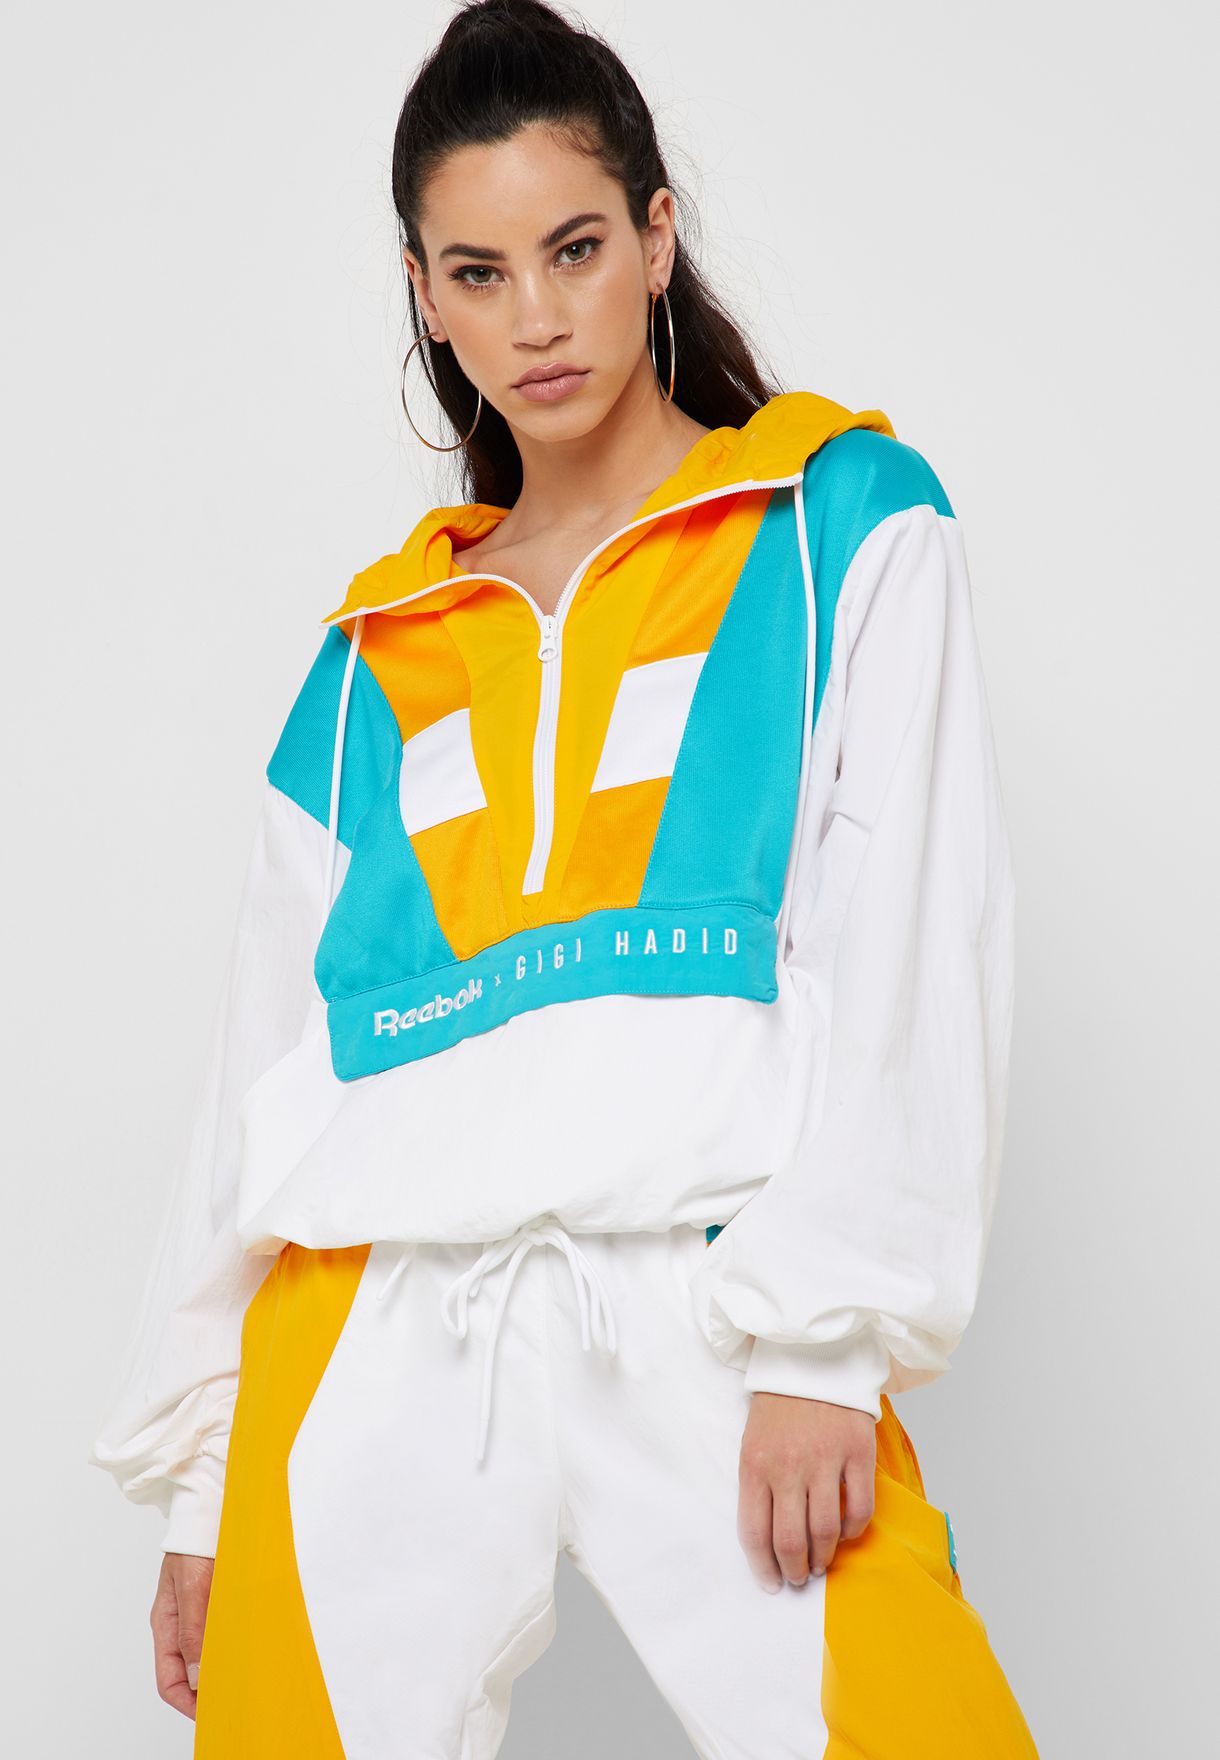 Reebok Hadid Cover Up Hooded for Women in MENA, Worldwide